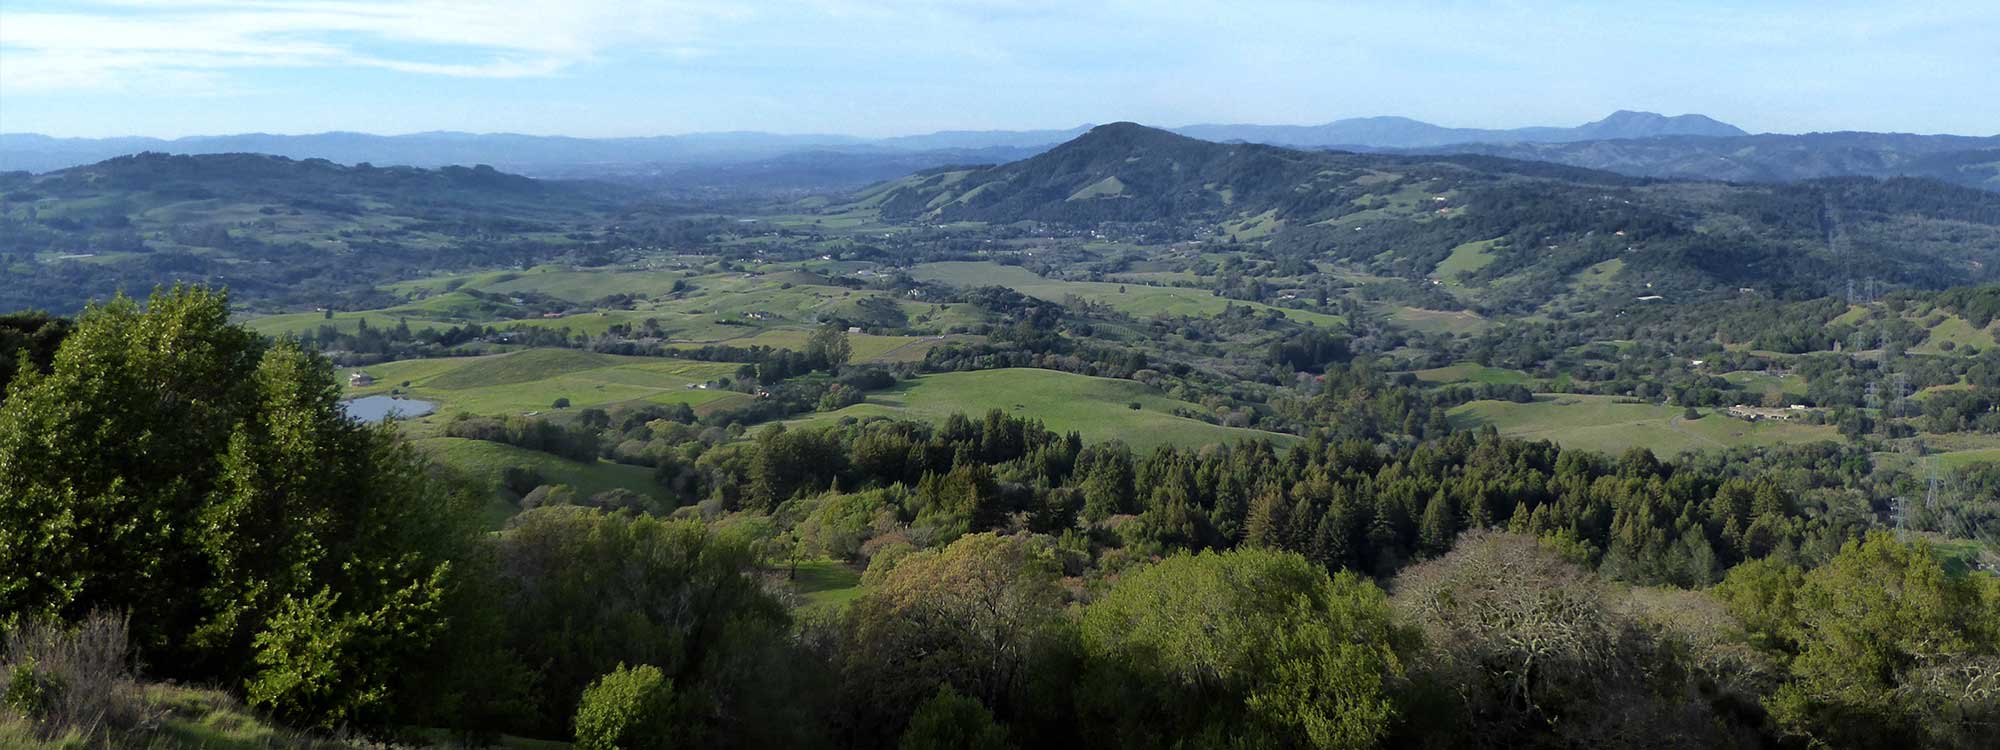 A view of Bennet Valley from Sonoma Mountain